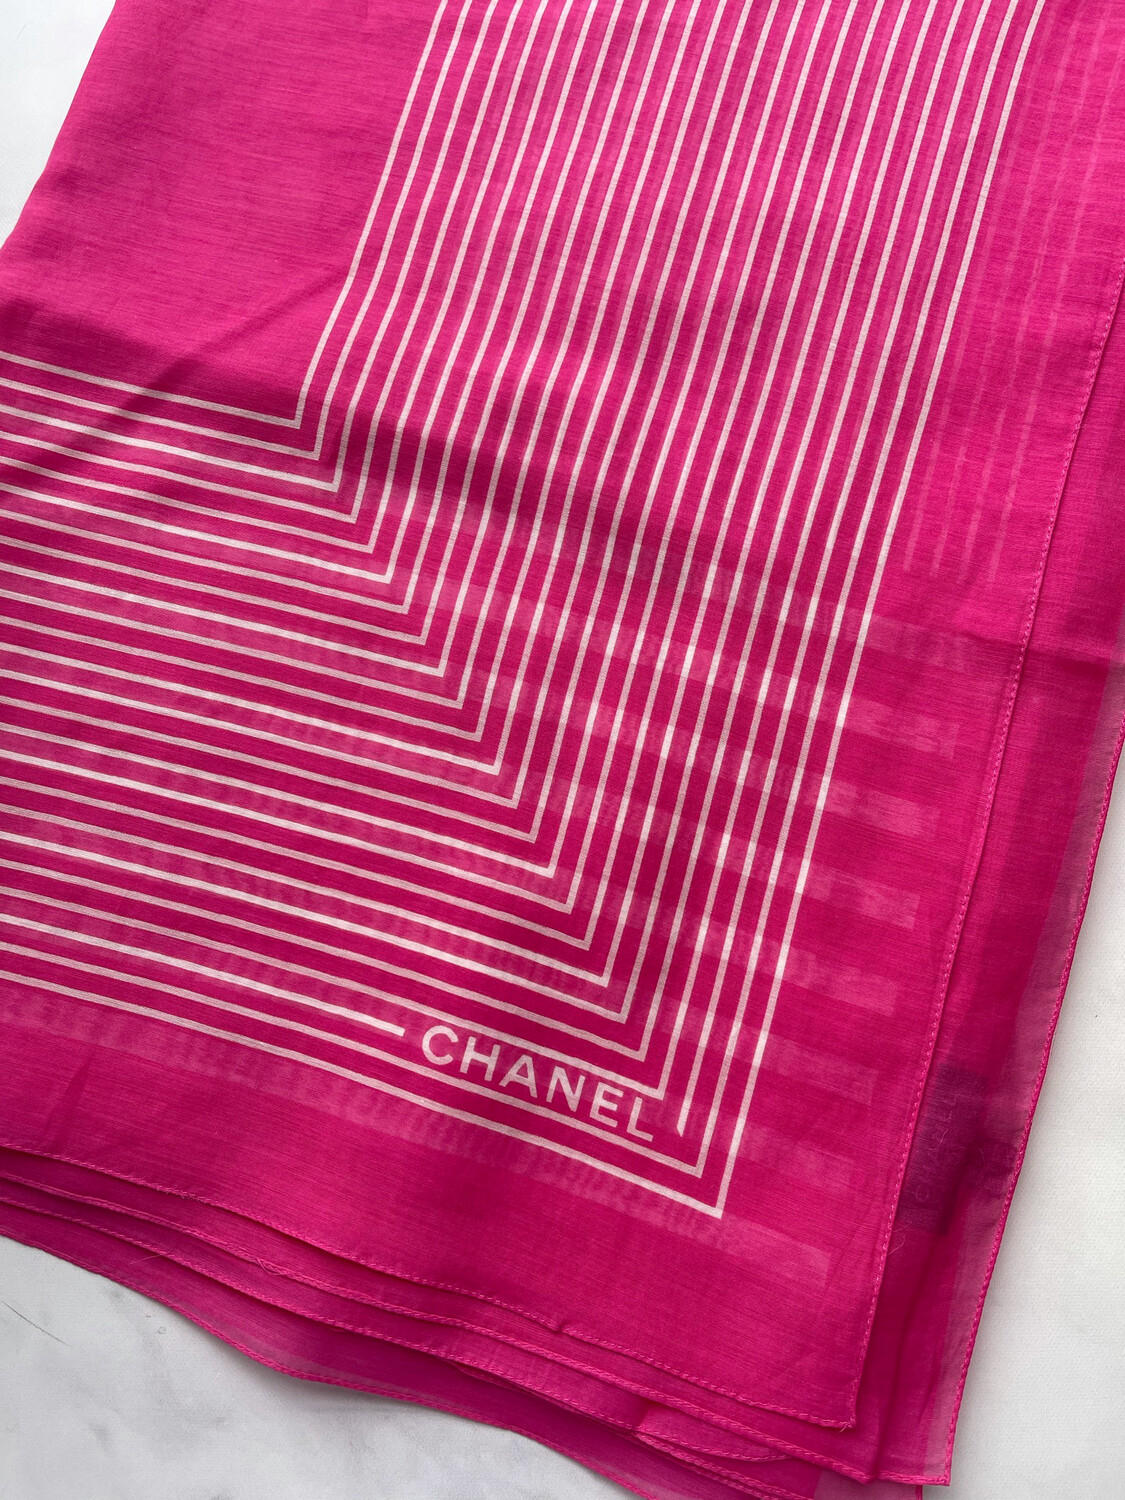 Chanel Scarf Lightweight Silk And Cotton, Pink, New - No Box